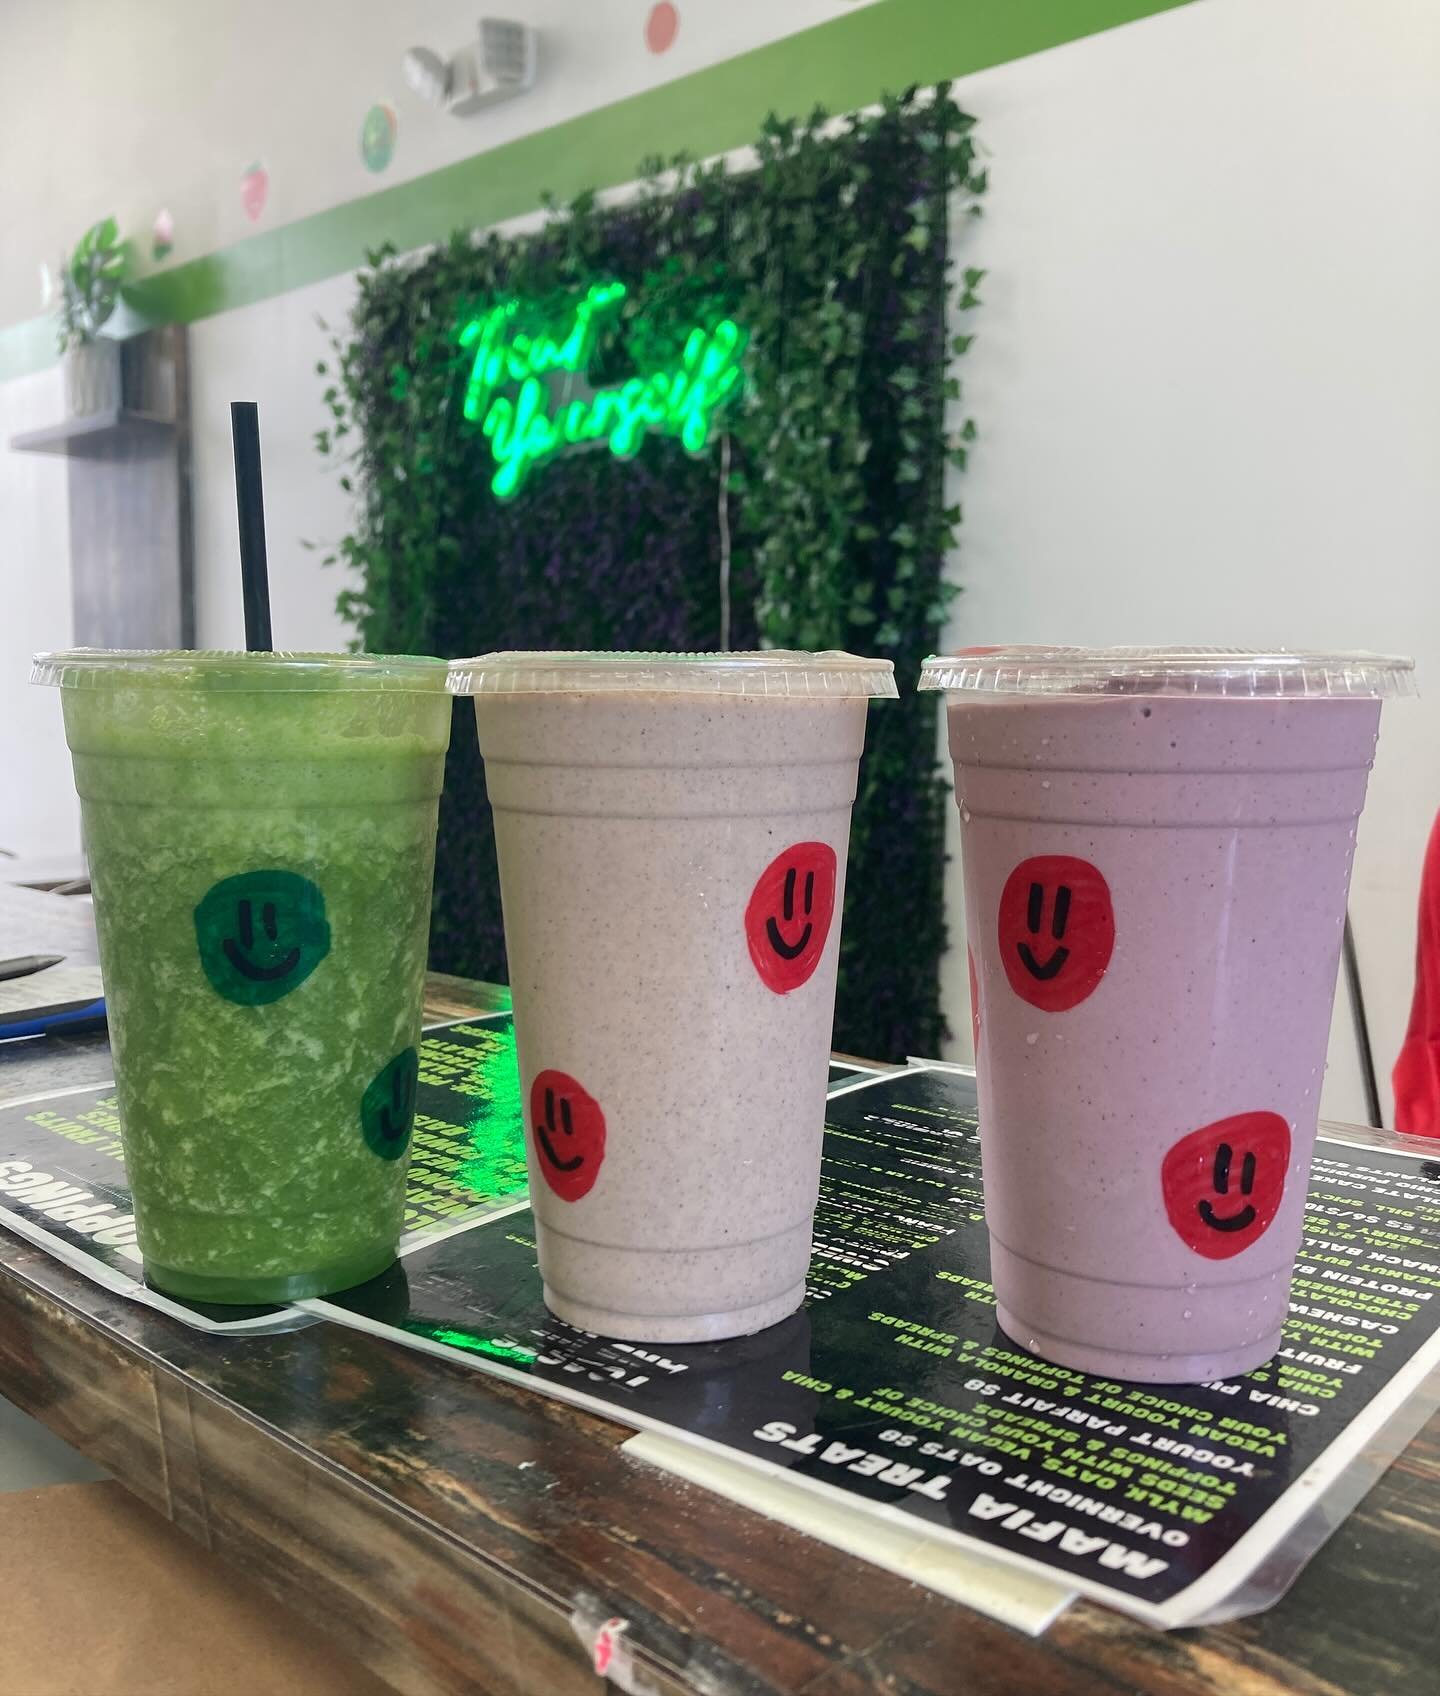 Whether you&rsquo;re craving something green, fruity or coffee, we&rsquo;ve got you covered! 

🍏🍎🍐🍊🍋🫐🍓🍇🍉🍌🍈🥭🍍🥑🥝🥥🥬🥒🌶️☕️

Check out our new and improved coffee options menu! 

Enjoy the nutritional powerhouse of one of our green smoot